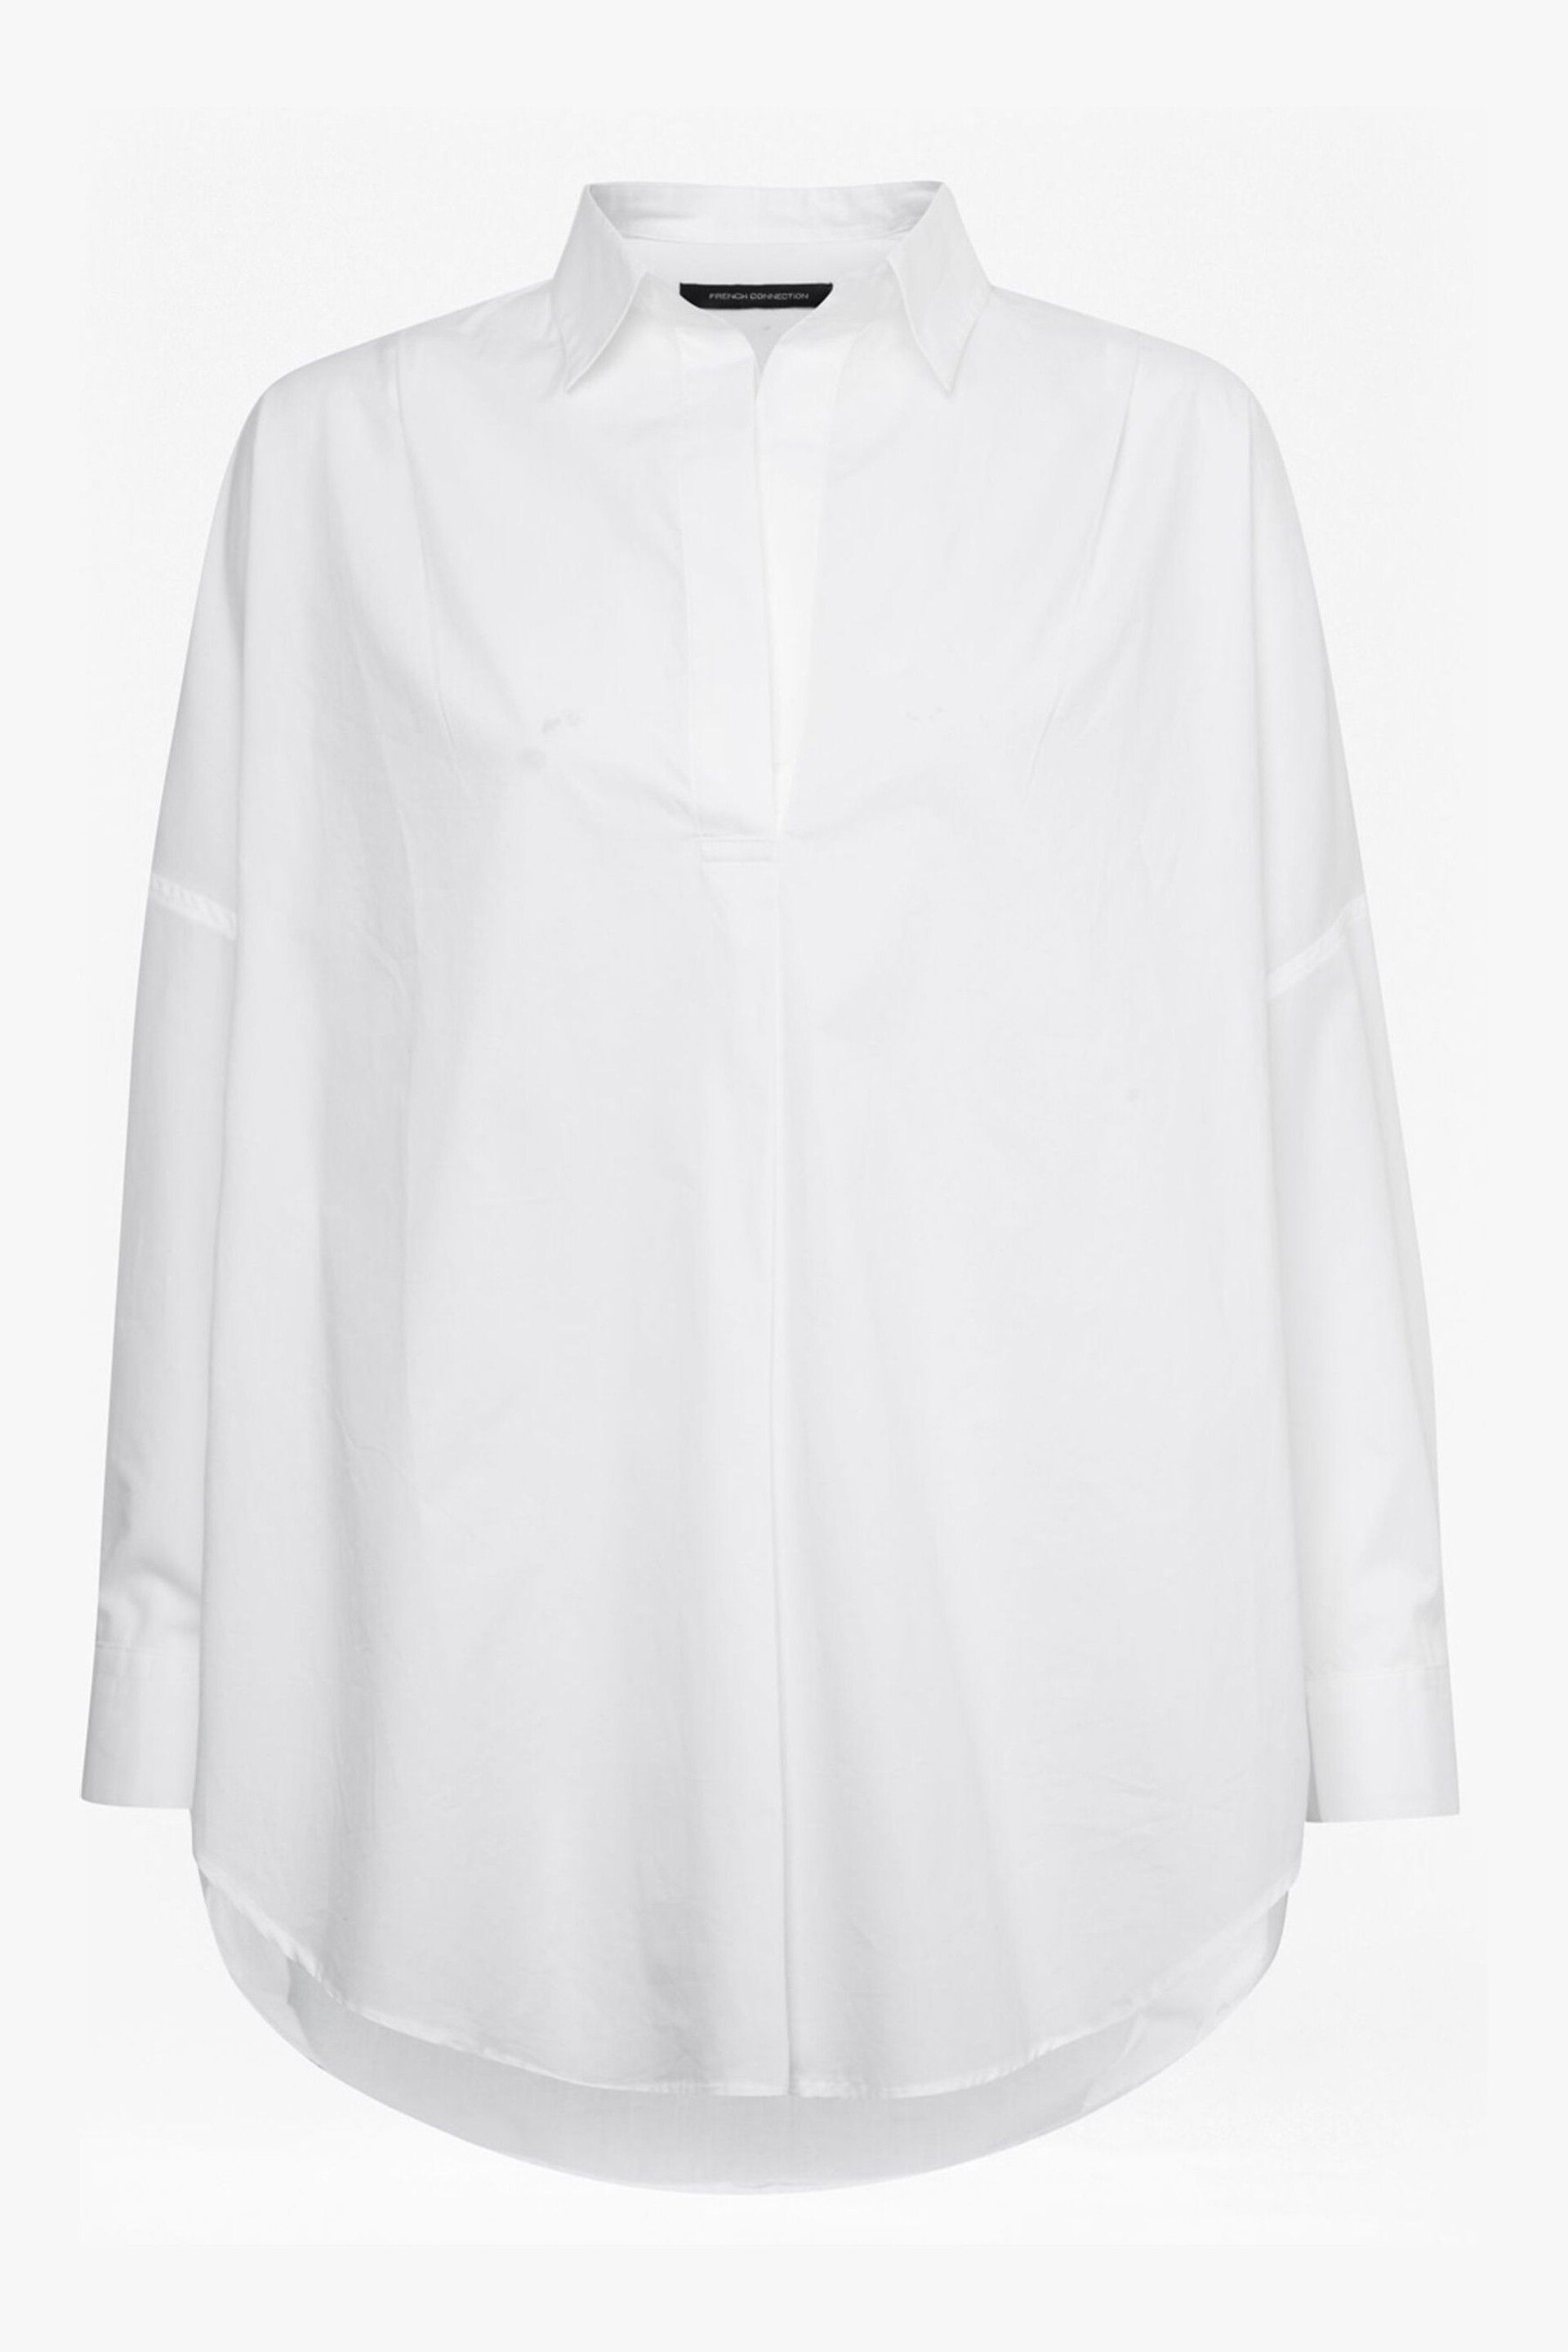 French Connection Rhodes Long Sleeves Popover Shirt - Image 4 of 4